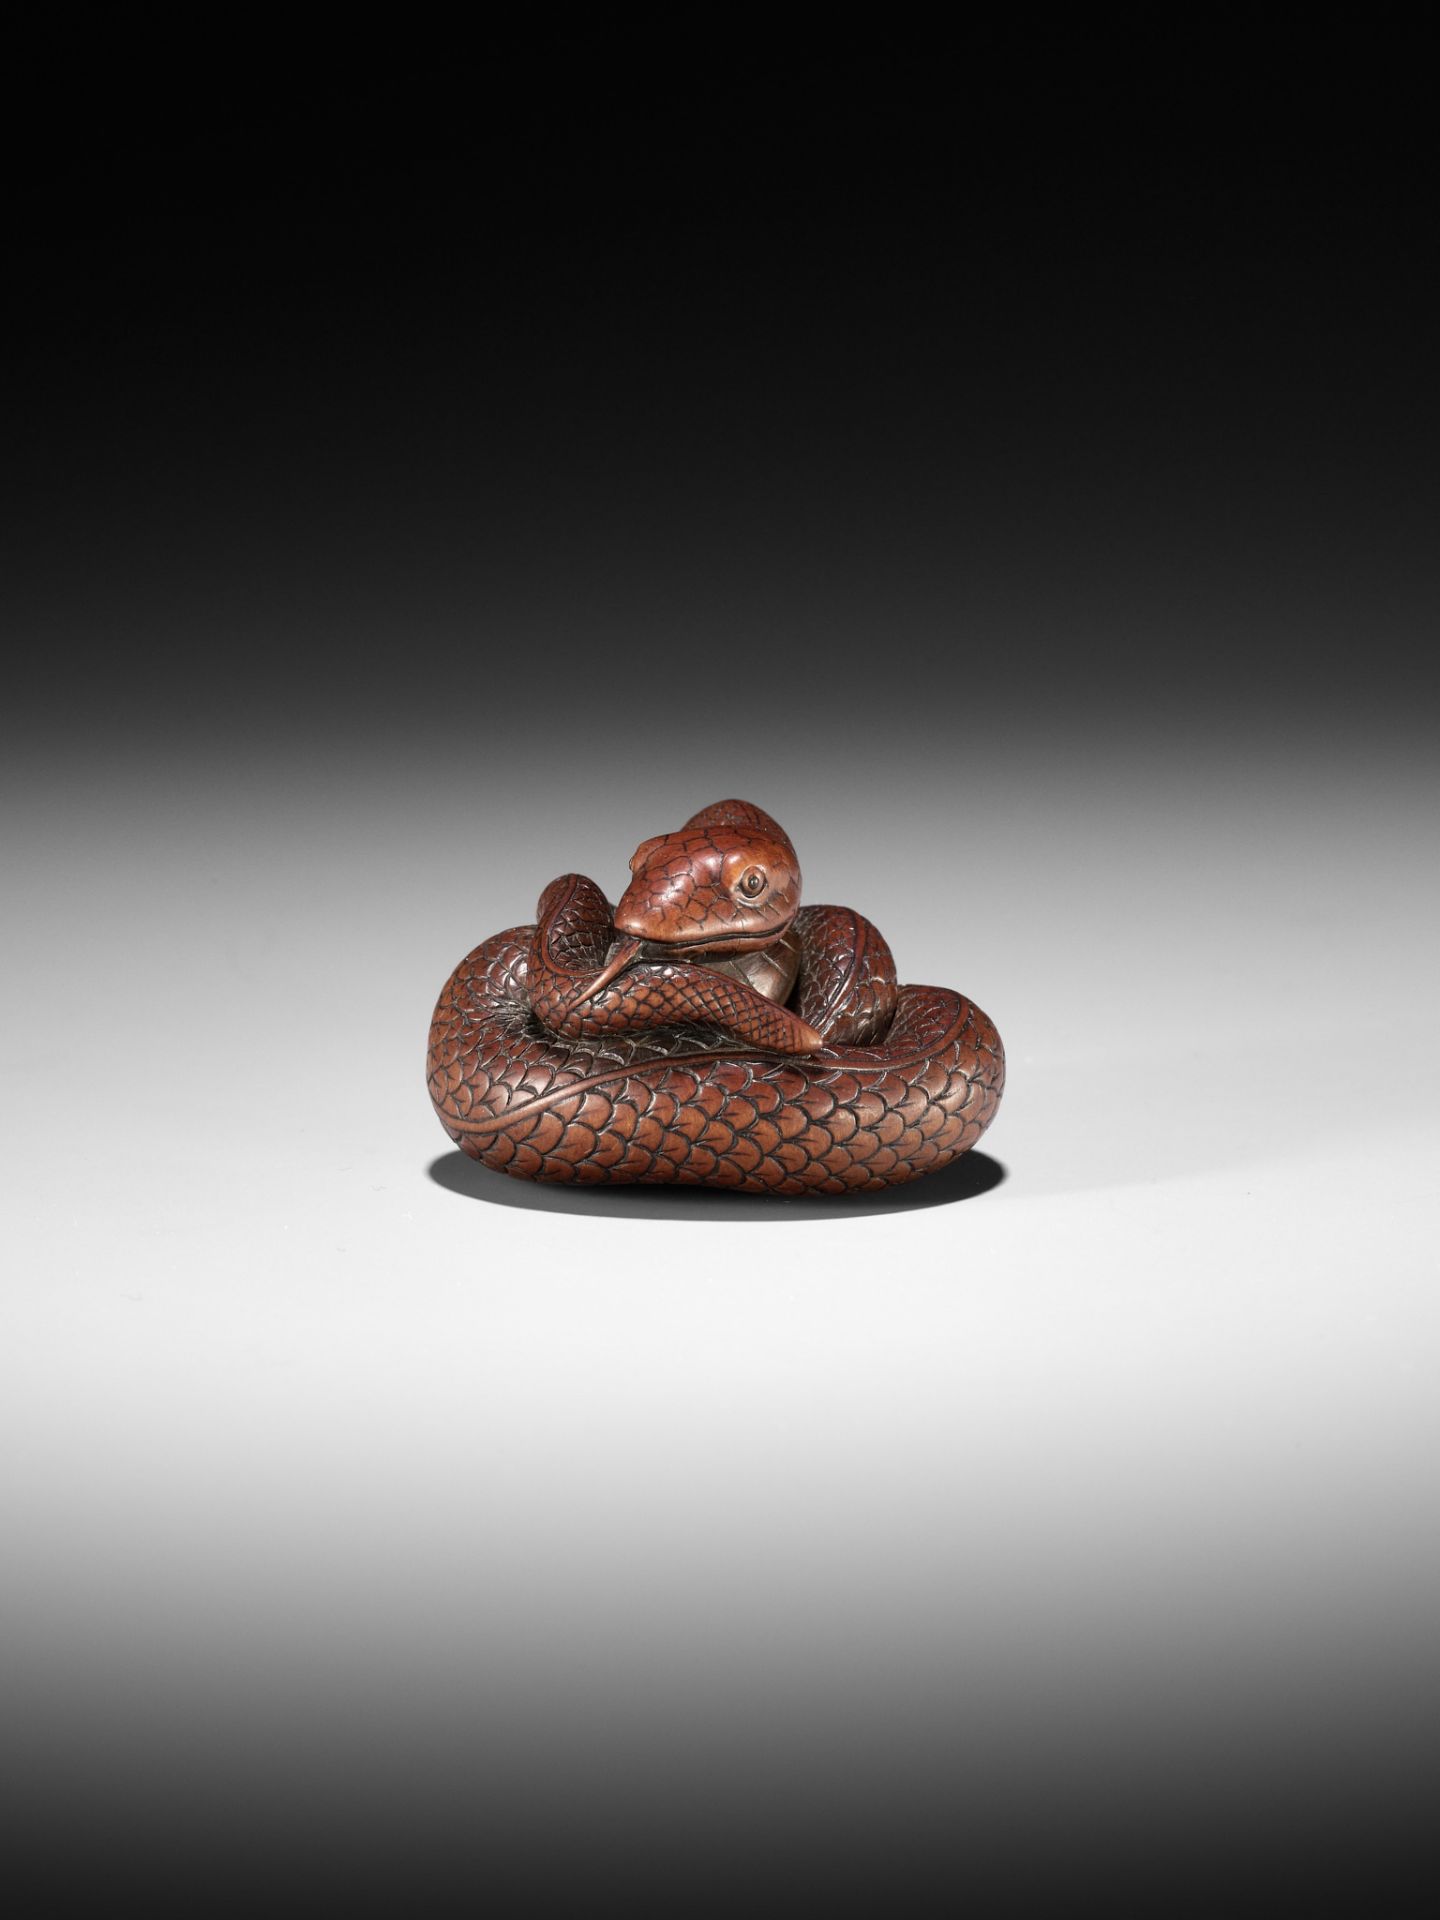 AN EXCEPTIONAL AND LARGE WOOD NETSUKE OF A SNAKE, ATTRIBUTED TO OKATOMO - Image 17 of 19